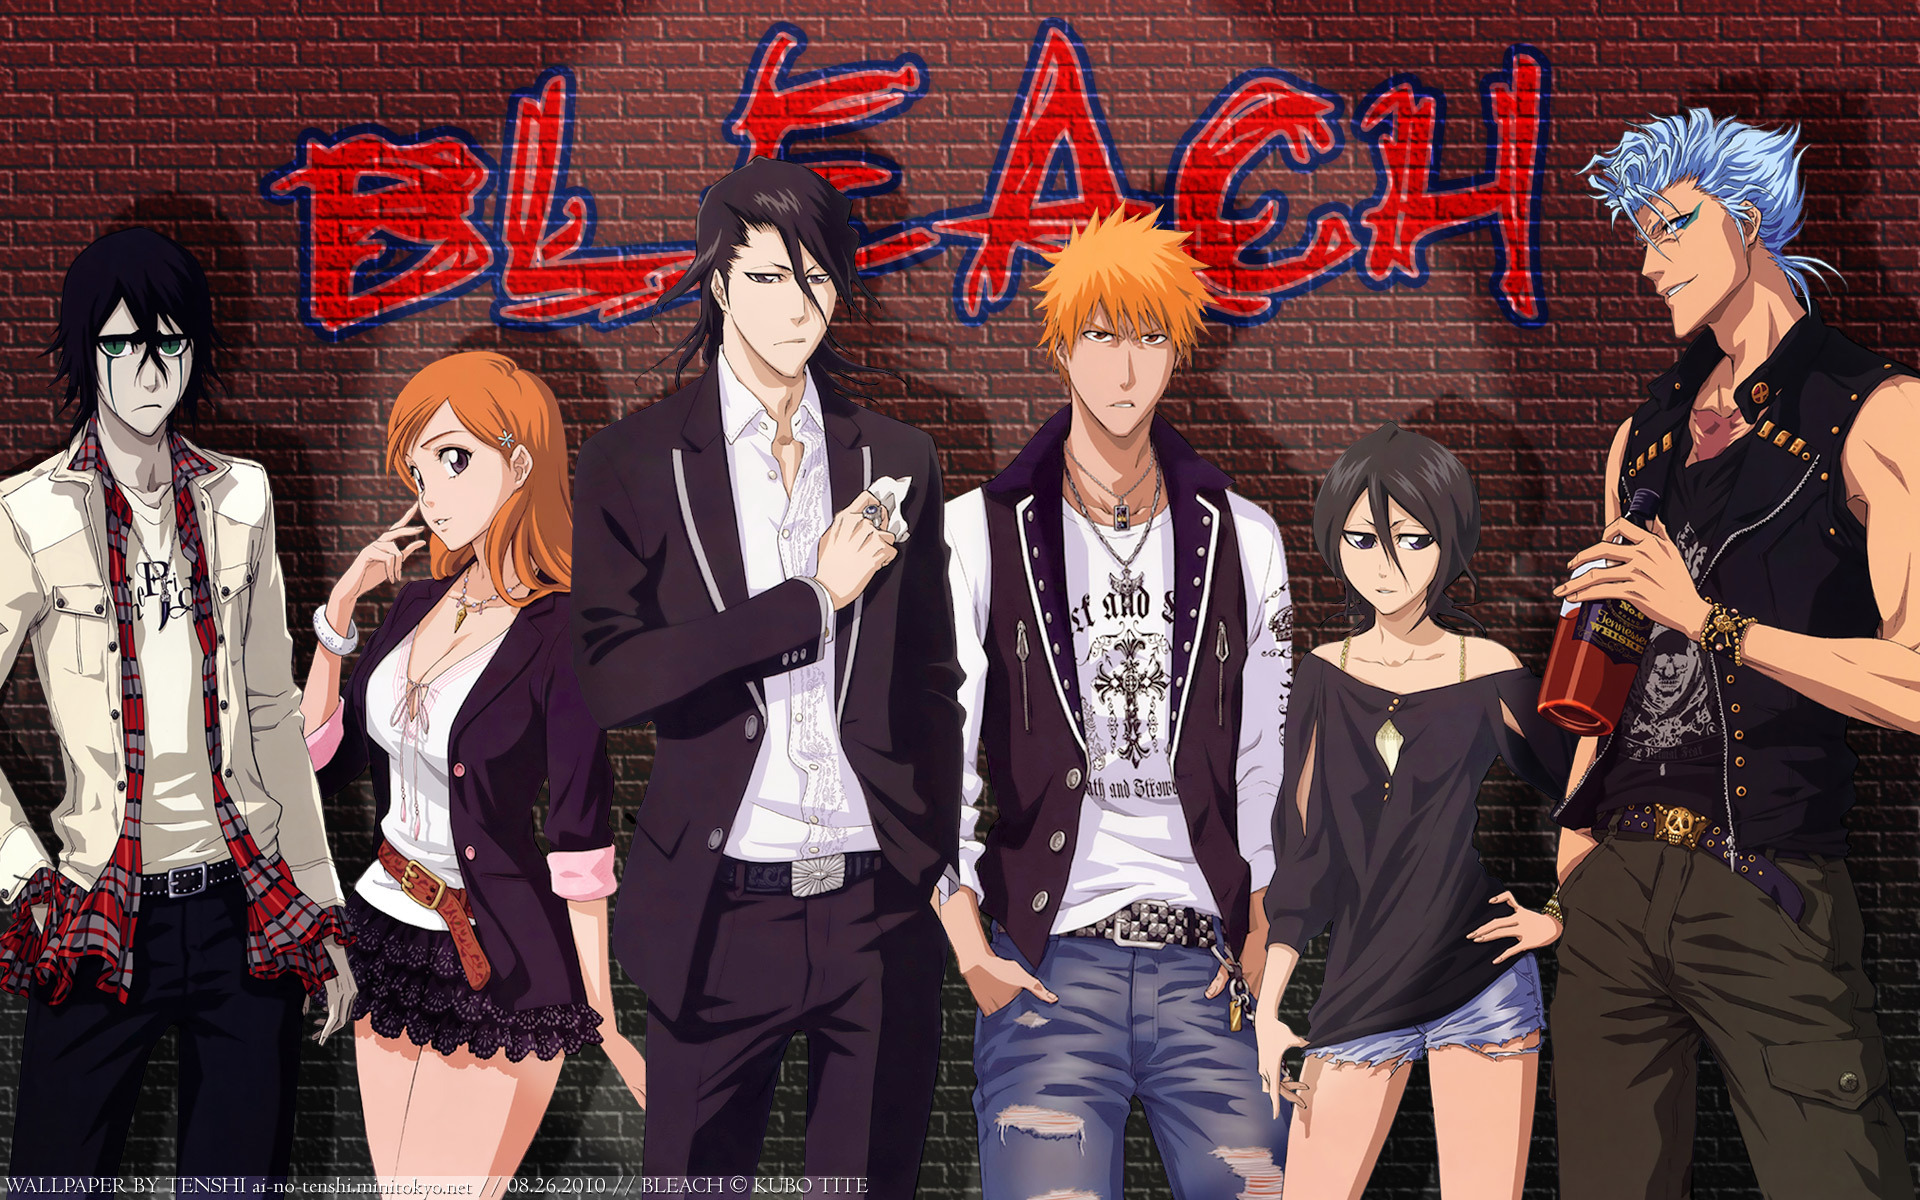 Top 10 Fun Facts About Bleach That You Probably Didn't Know